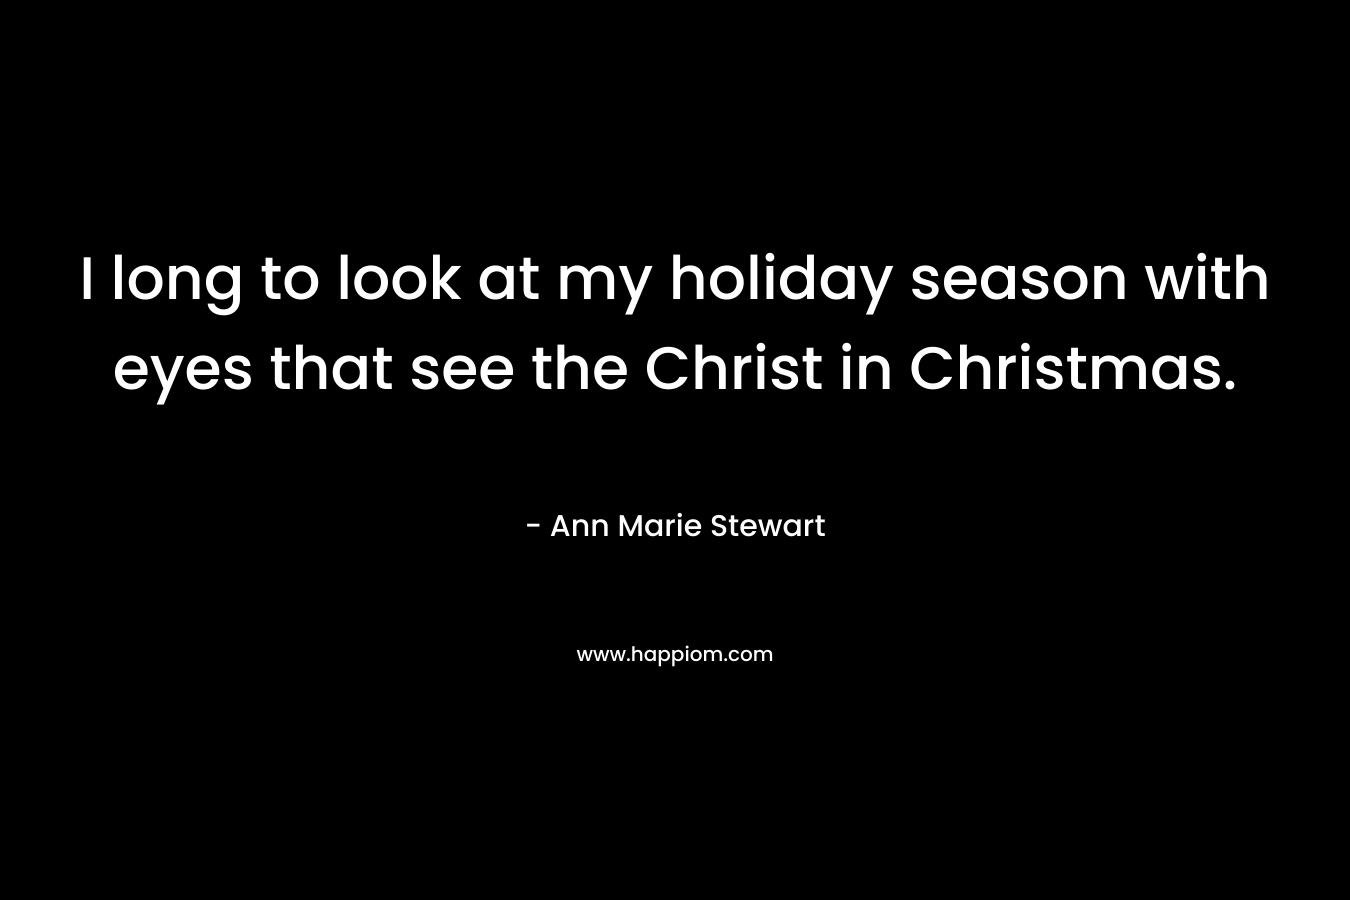 I long to look at my holiday season with eyes that see the Christ in Christmas. – Ann Marie Stewart